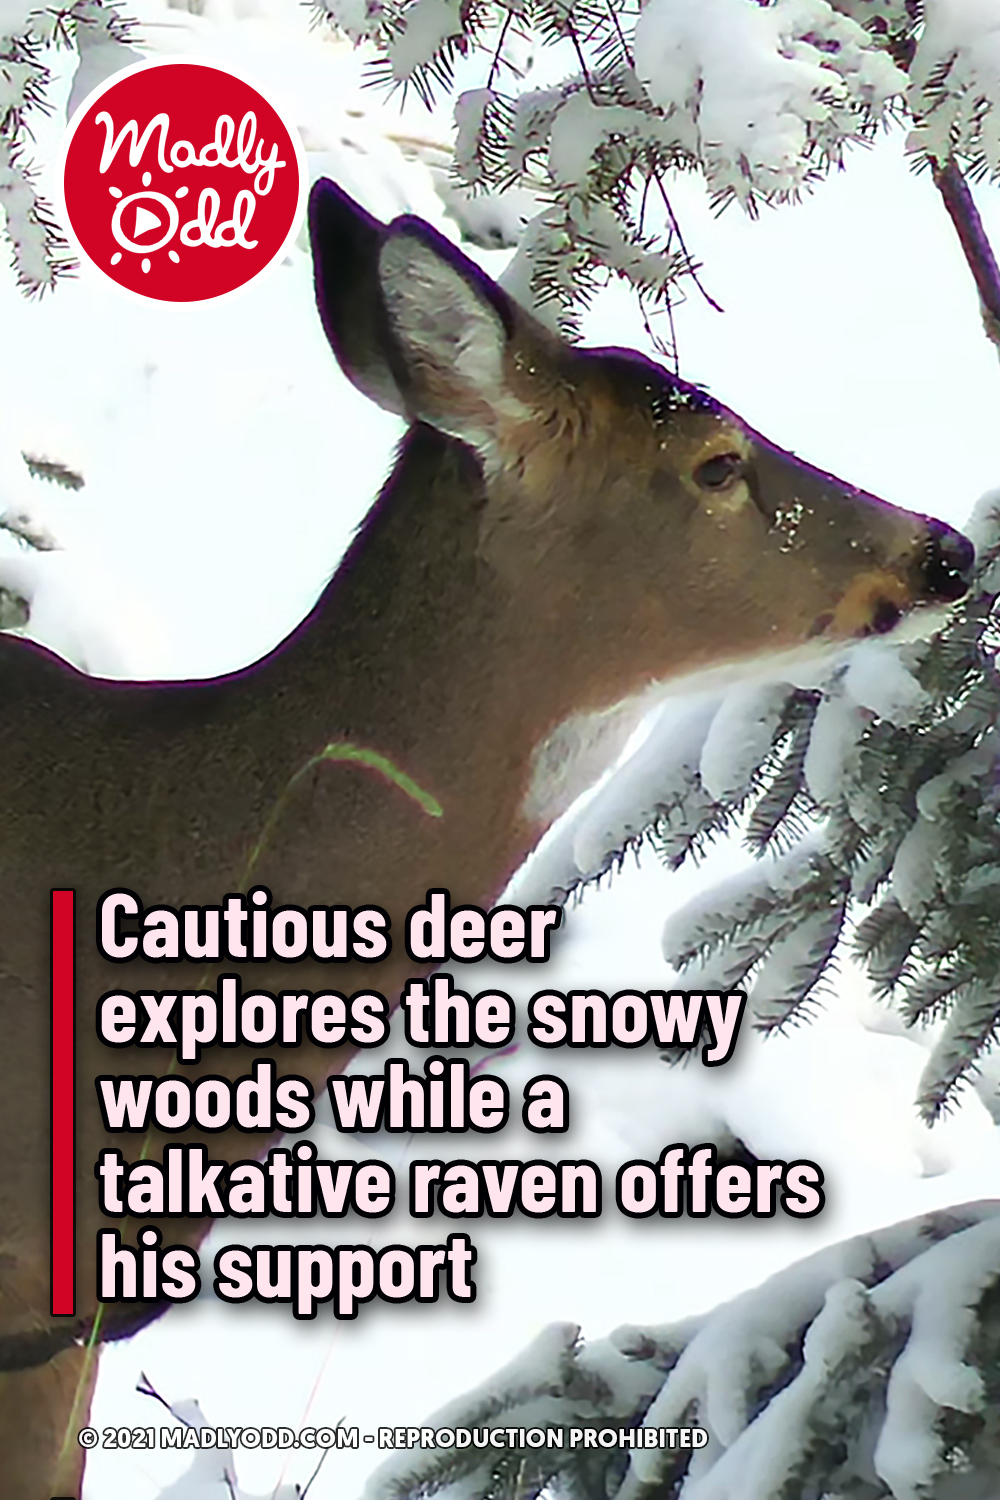 Cautious deer explores the snowy woods while a talkative raven offers his support